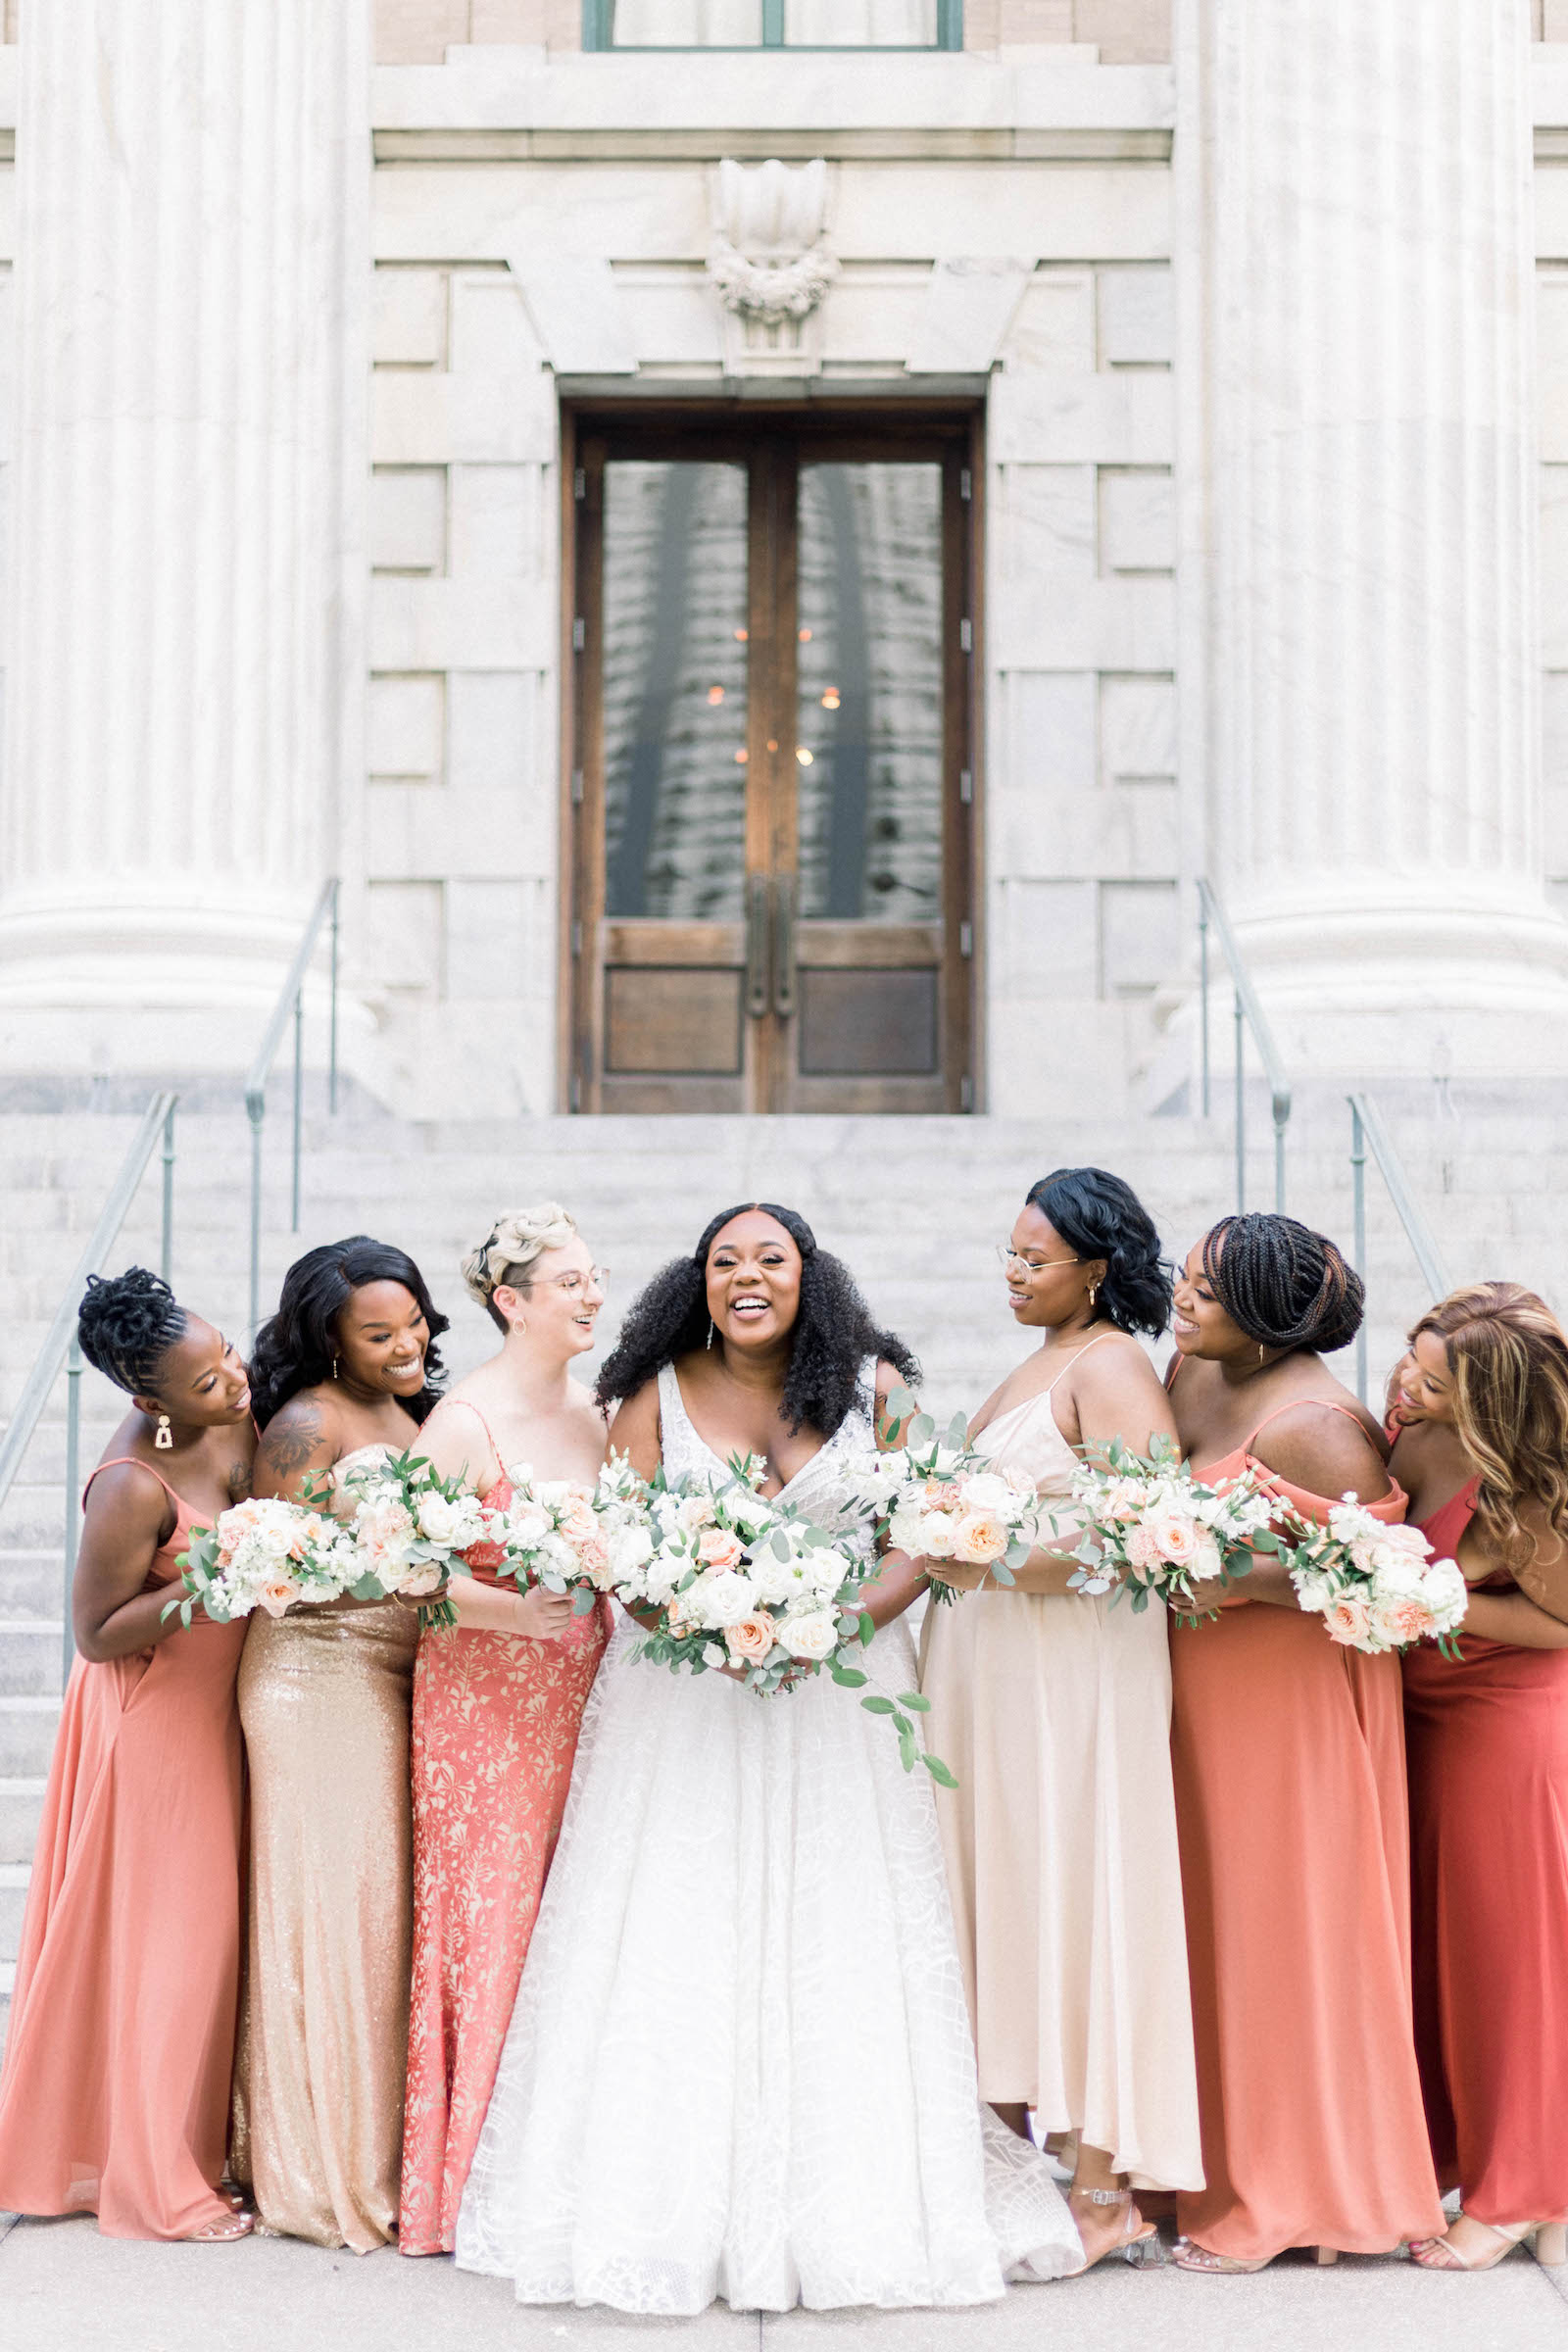 Bride with Bridesmaids in Mix and Match Jenny Yoo Bridesmaids Dresses in Burnt Orange and Champagne Wedding Portrait